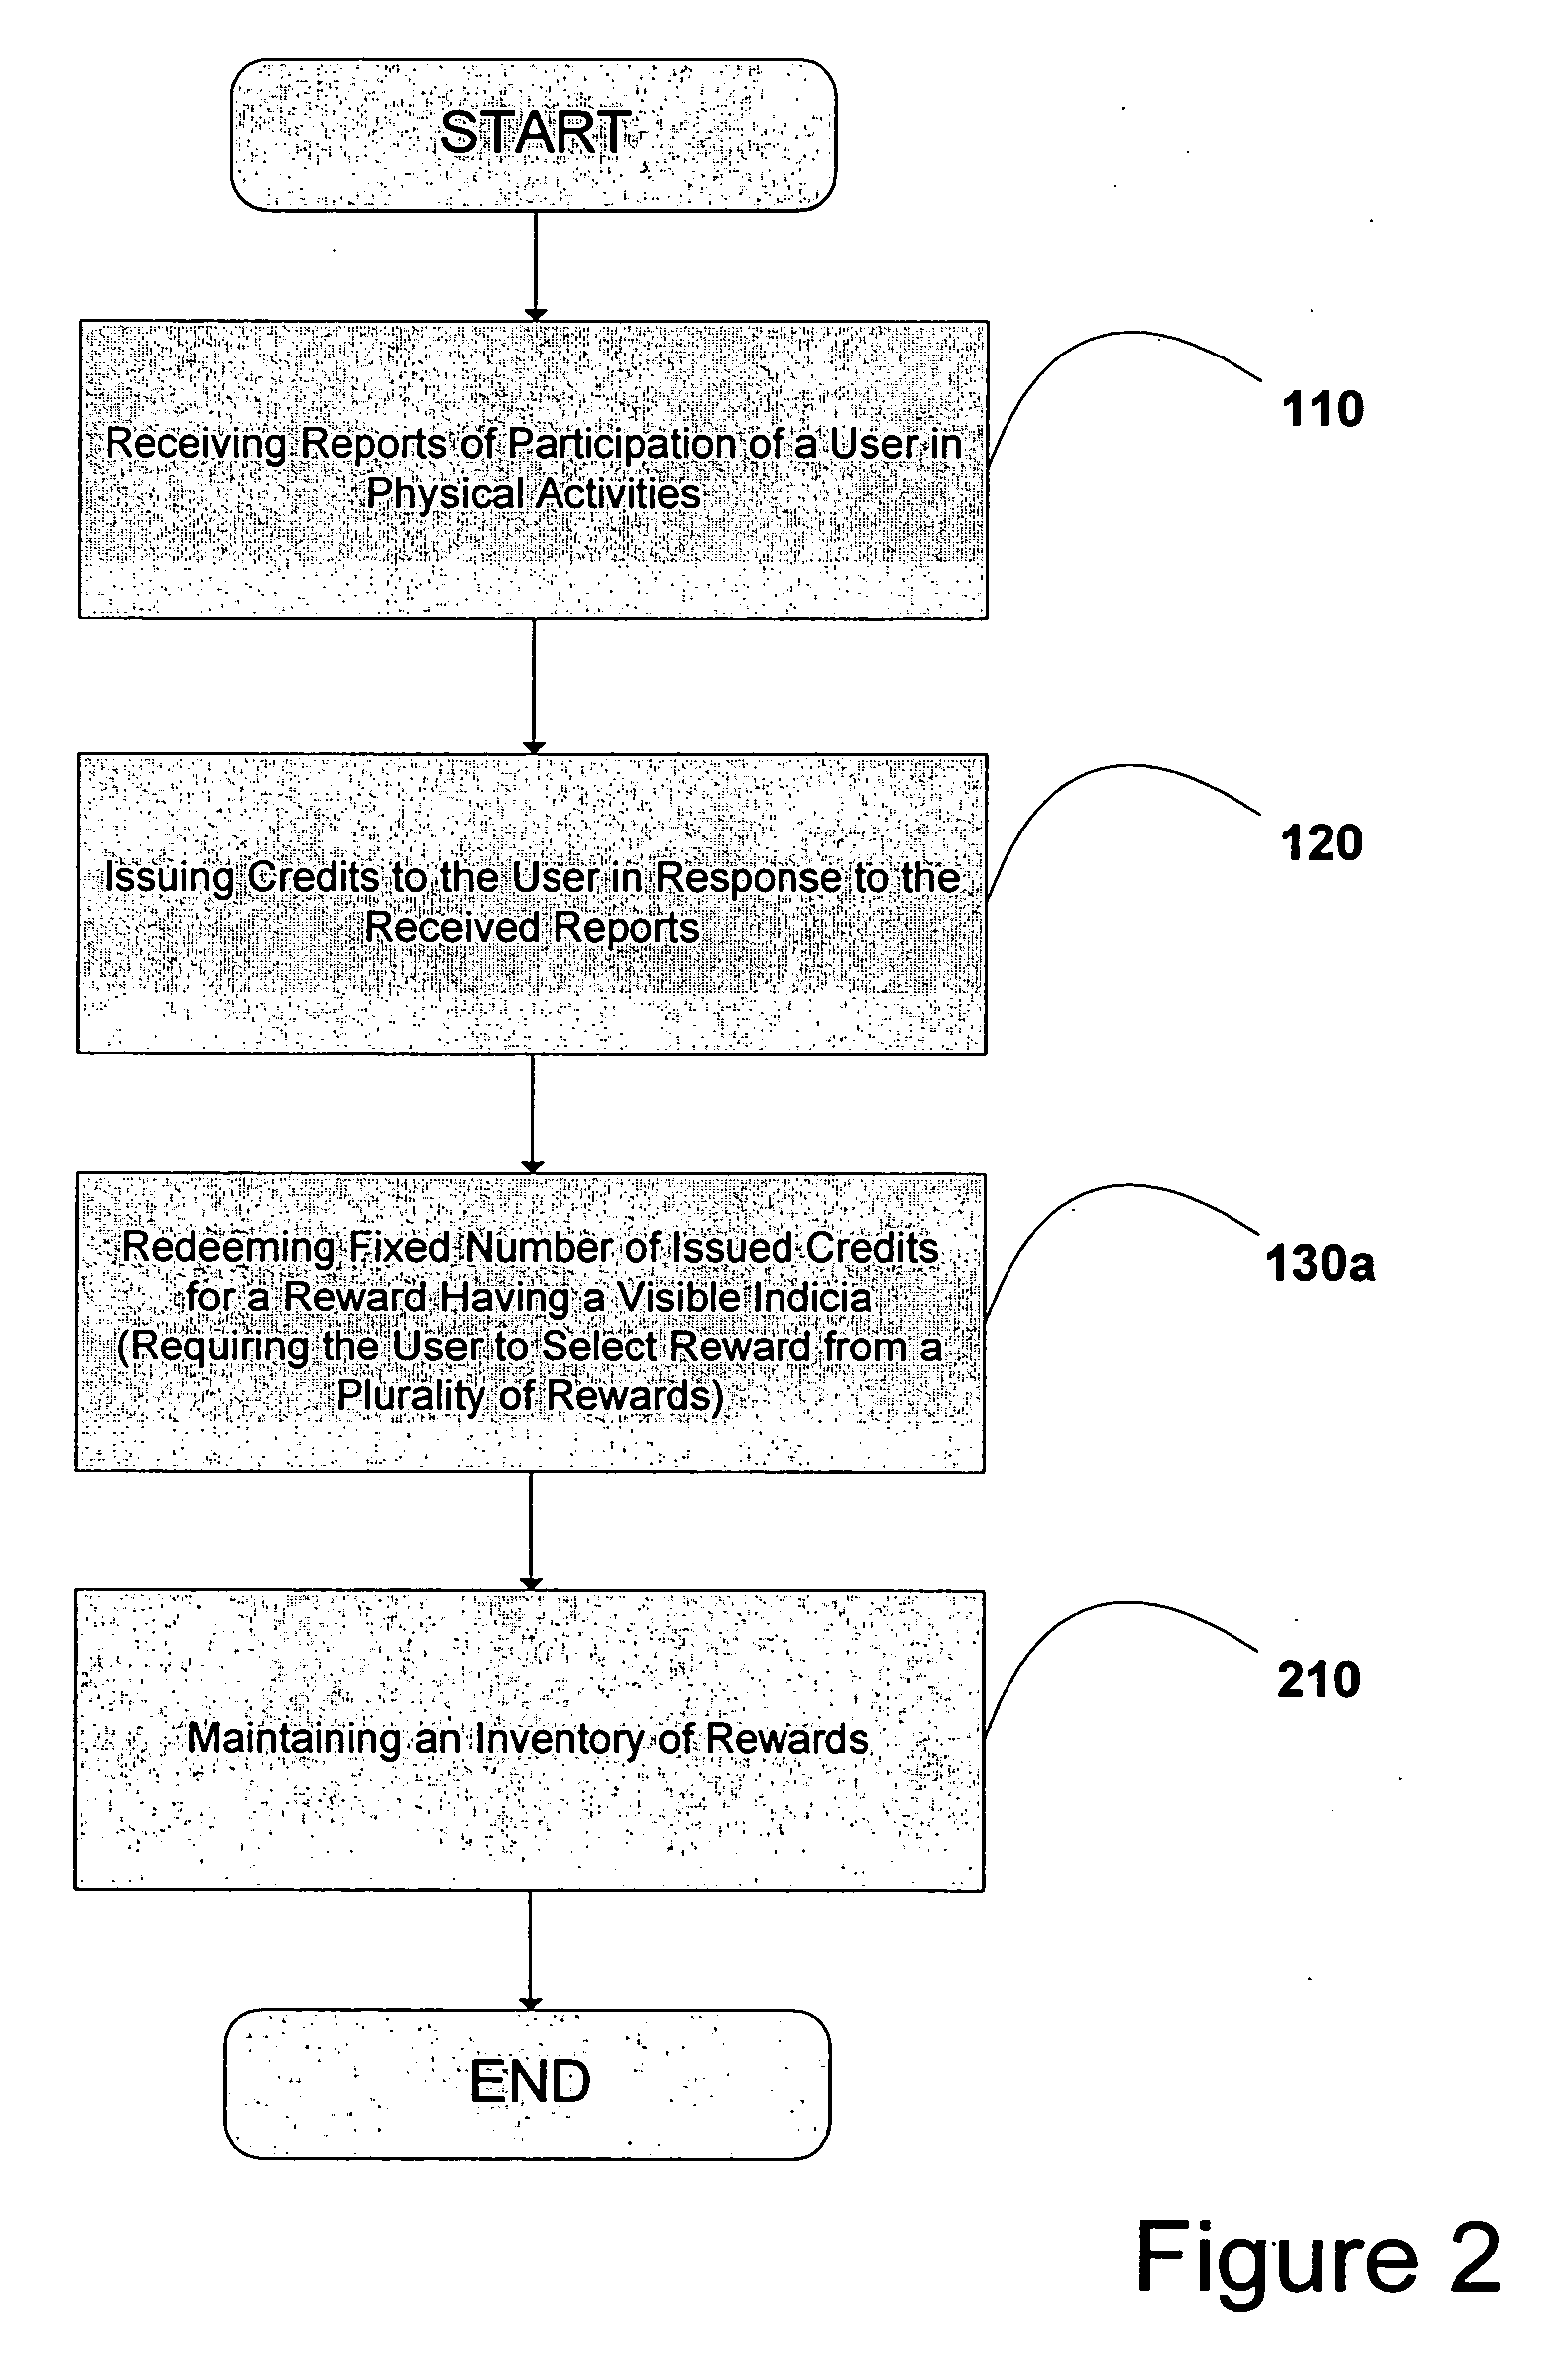 System and method for providing rewards including visible indicia thereon to a user to encourage physical activity and to encourage the accurate reporting of physical activity